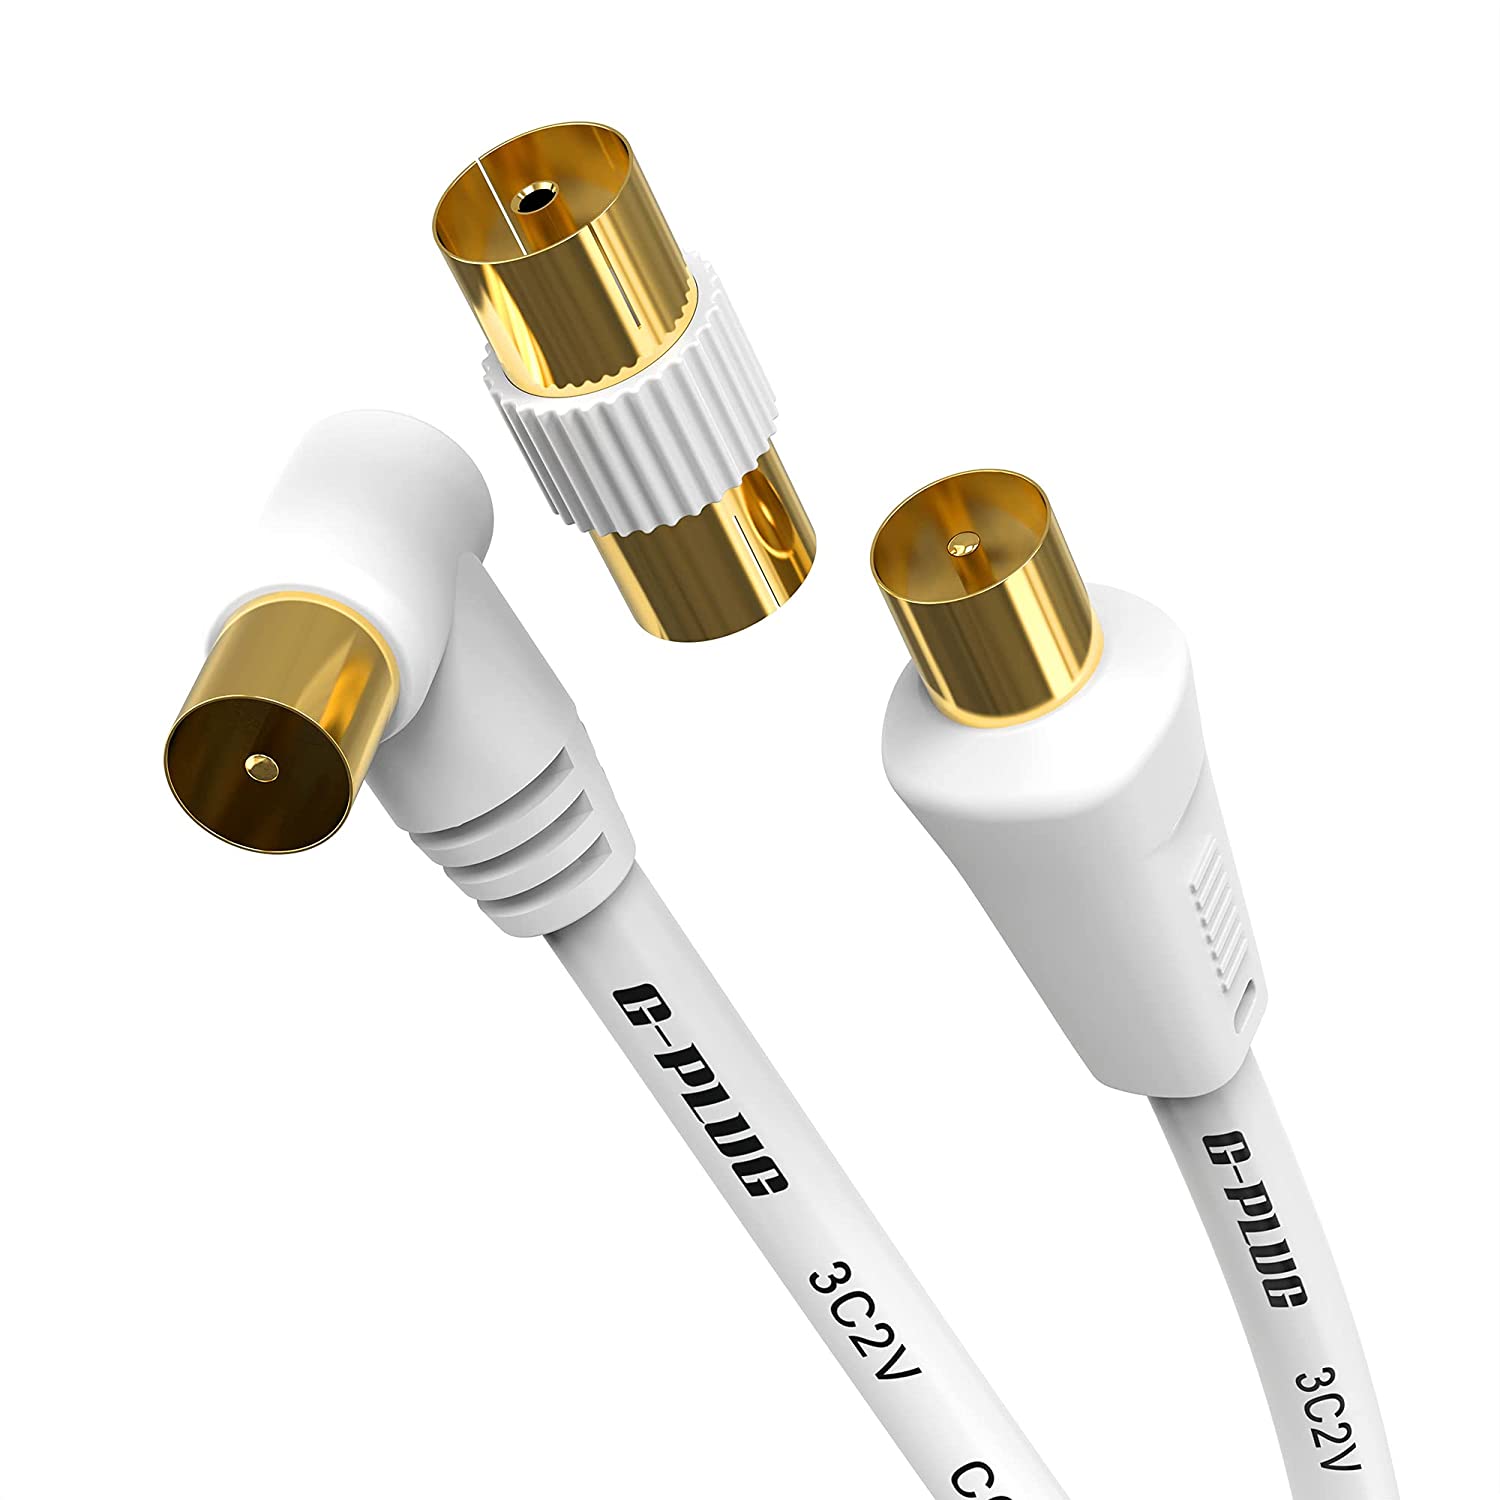 10m, White Cord Male to Female 75 Ohm, 120dB for TV, HDTV, Radio, Freeview, DVB-T2, DVB-C, DVB-S MainCore 10m Aerial Antenna Coaxial Cable Angled 90° Right Angle Extension Coax Lead 